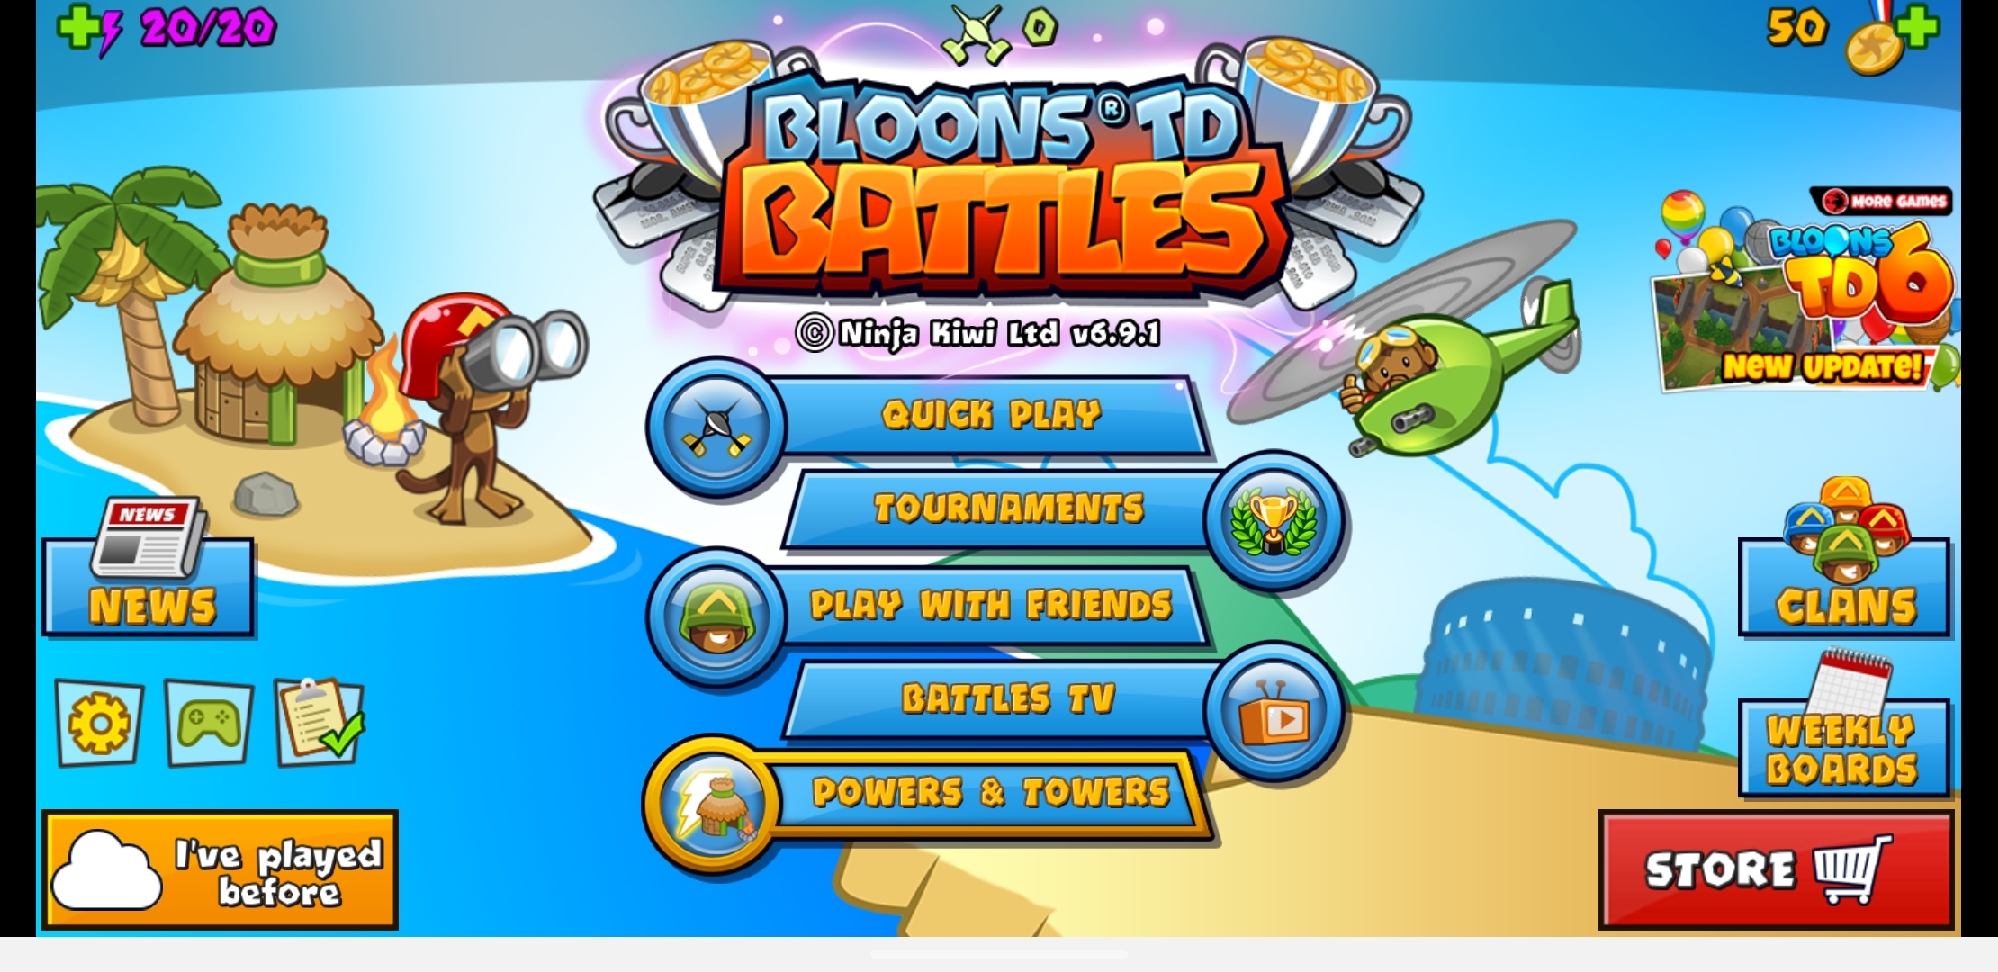 bloons td battles mod apk android4.9.2